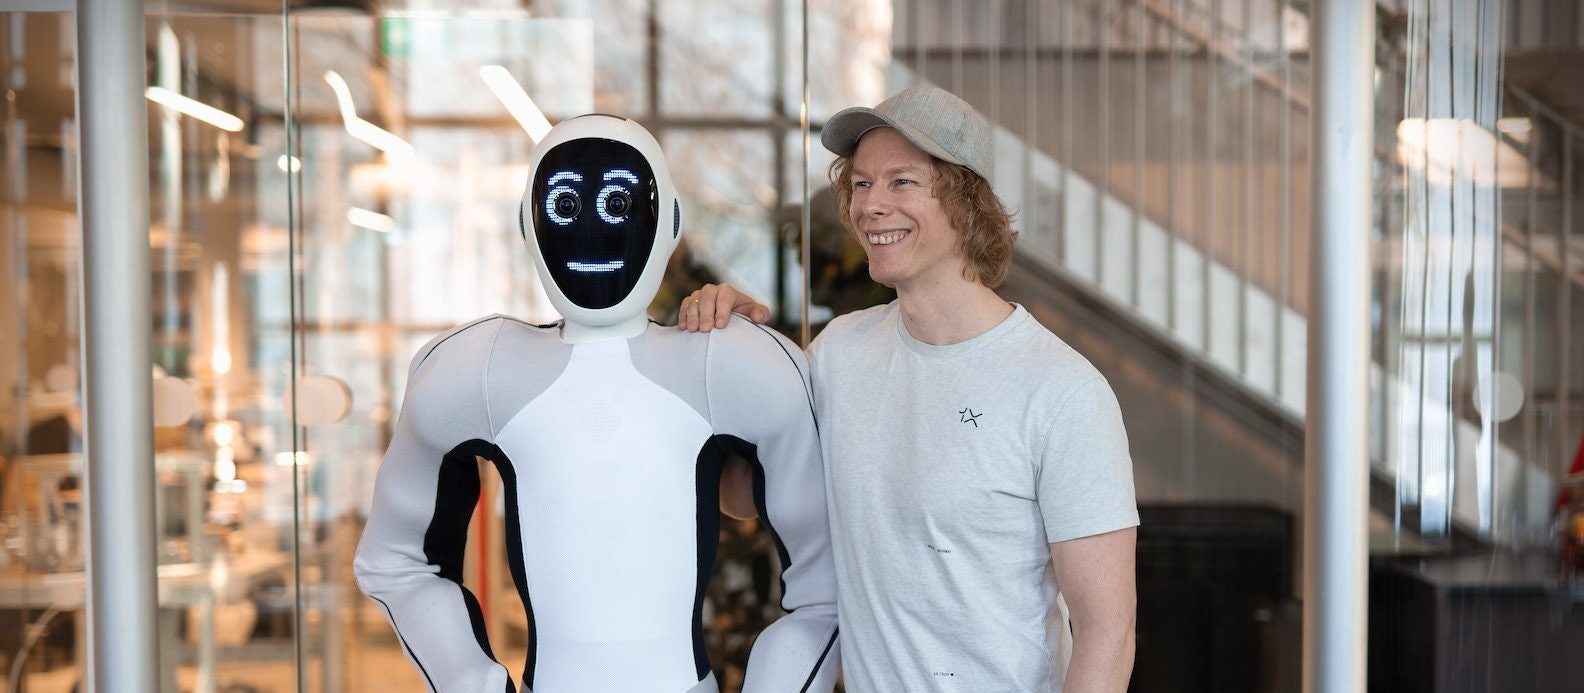 Picture of 1X's CEO Bernt Øivind Børnich and the android EVE